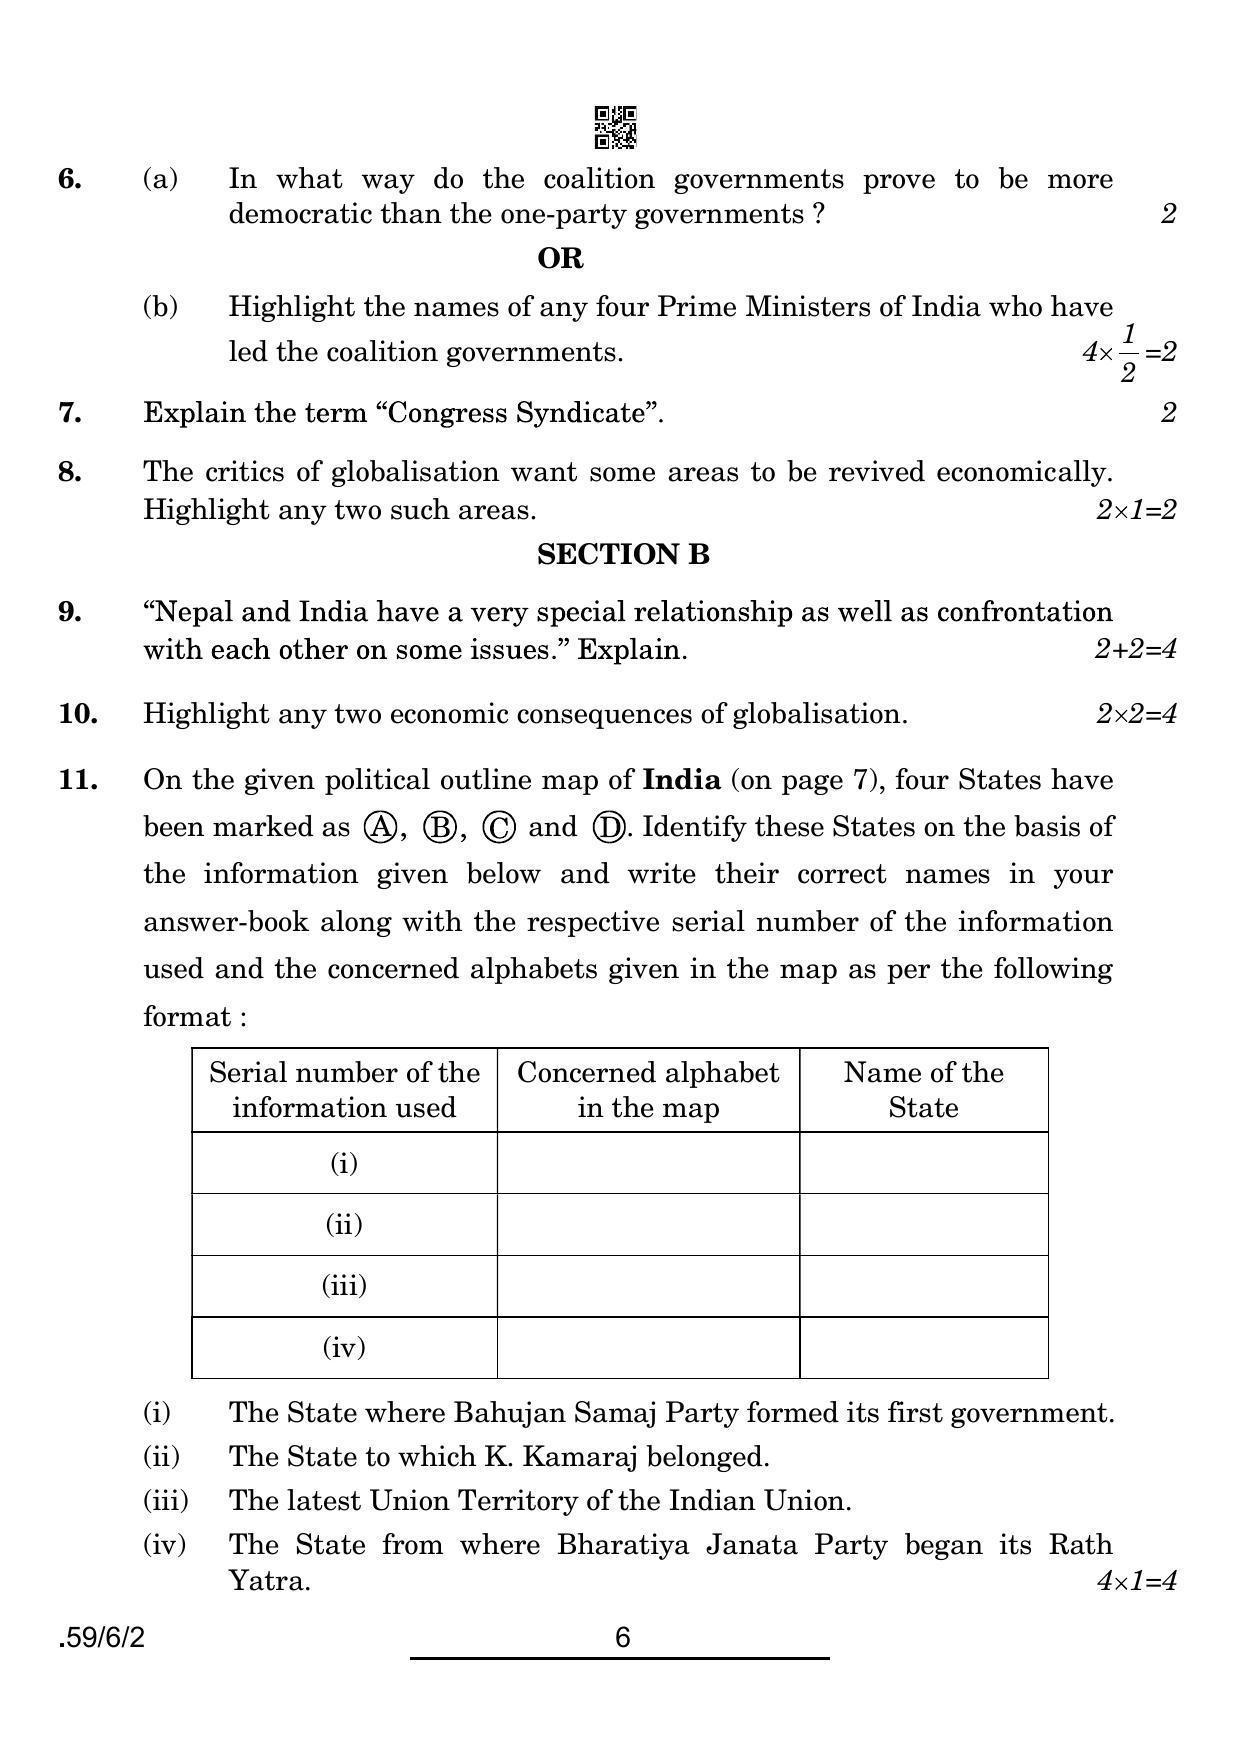 CBSE Class 12 59-6-2 POL SCIENCE 2022 Compartment Question Paper - Page 6